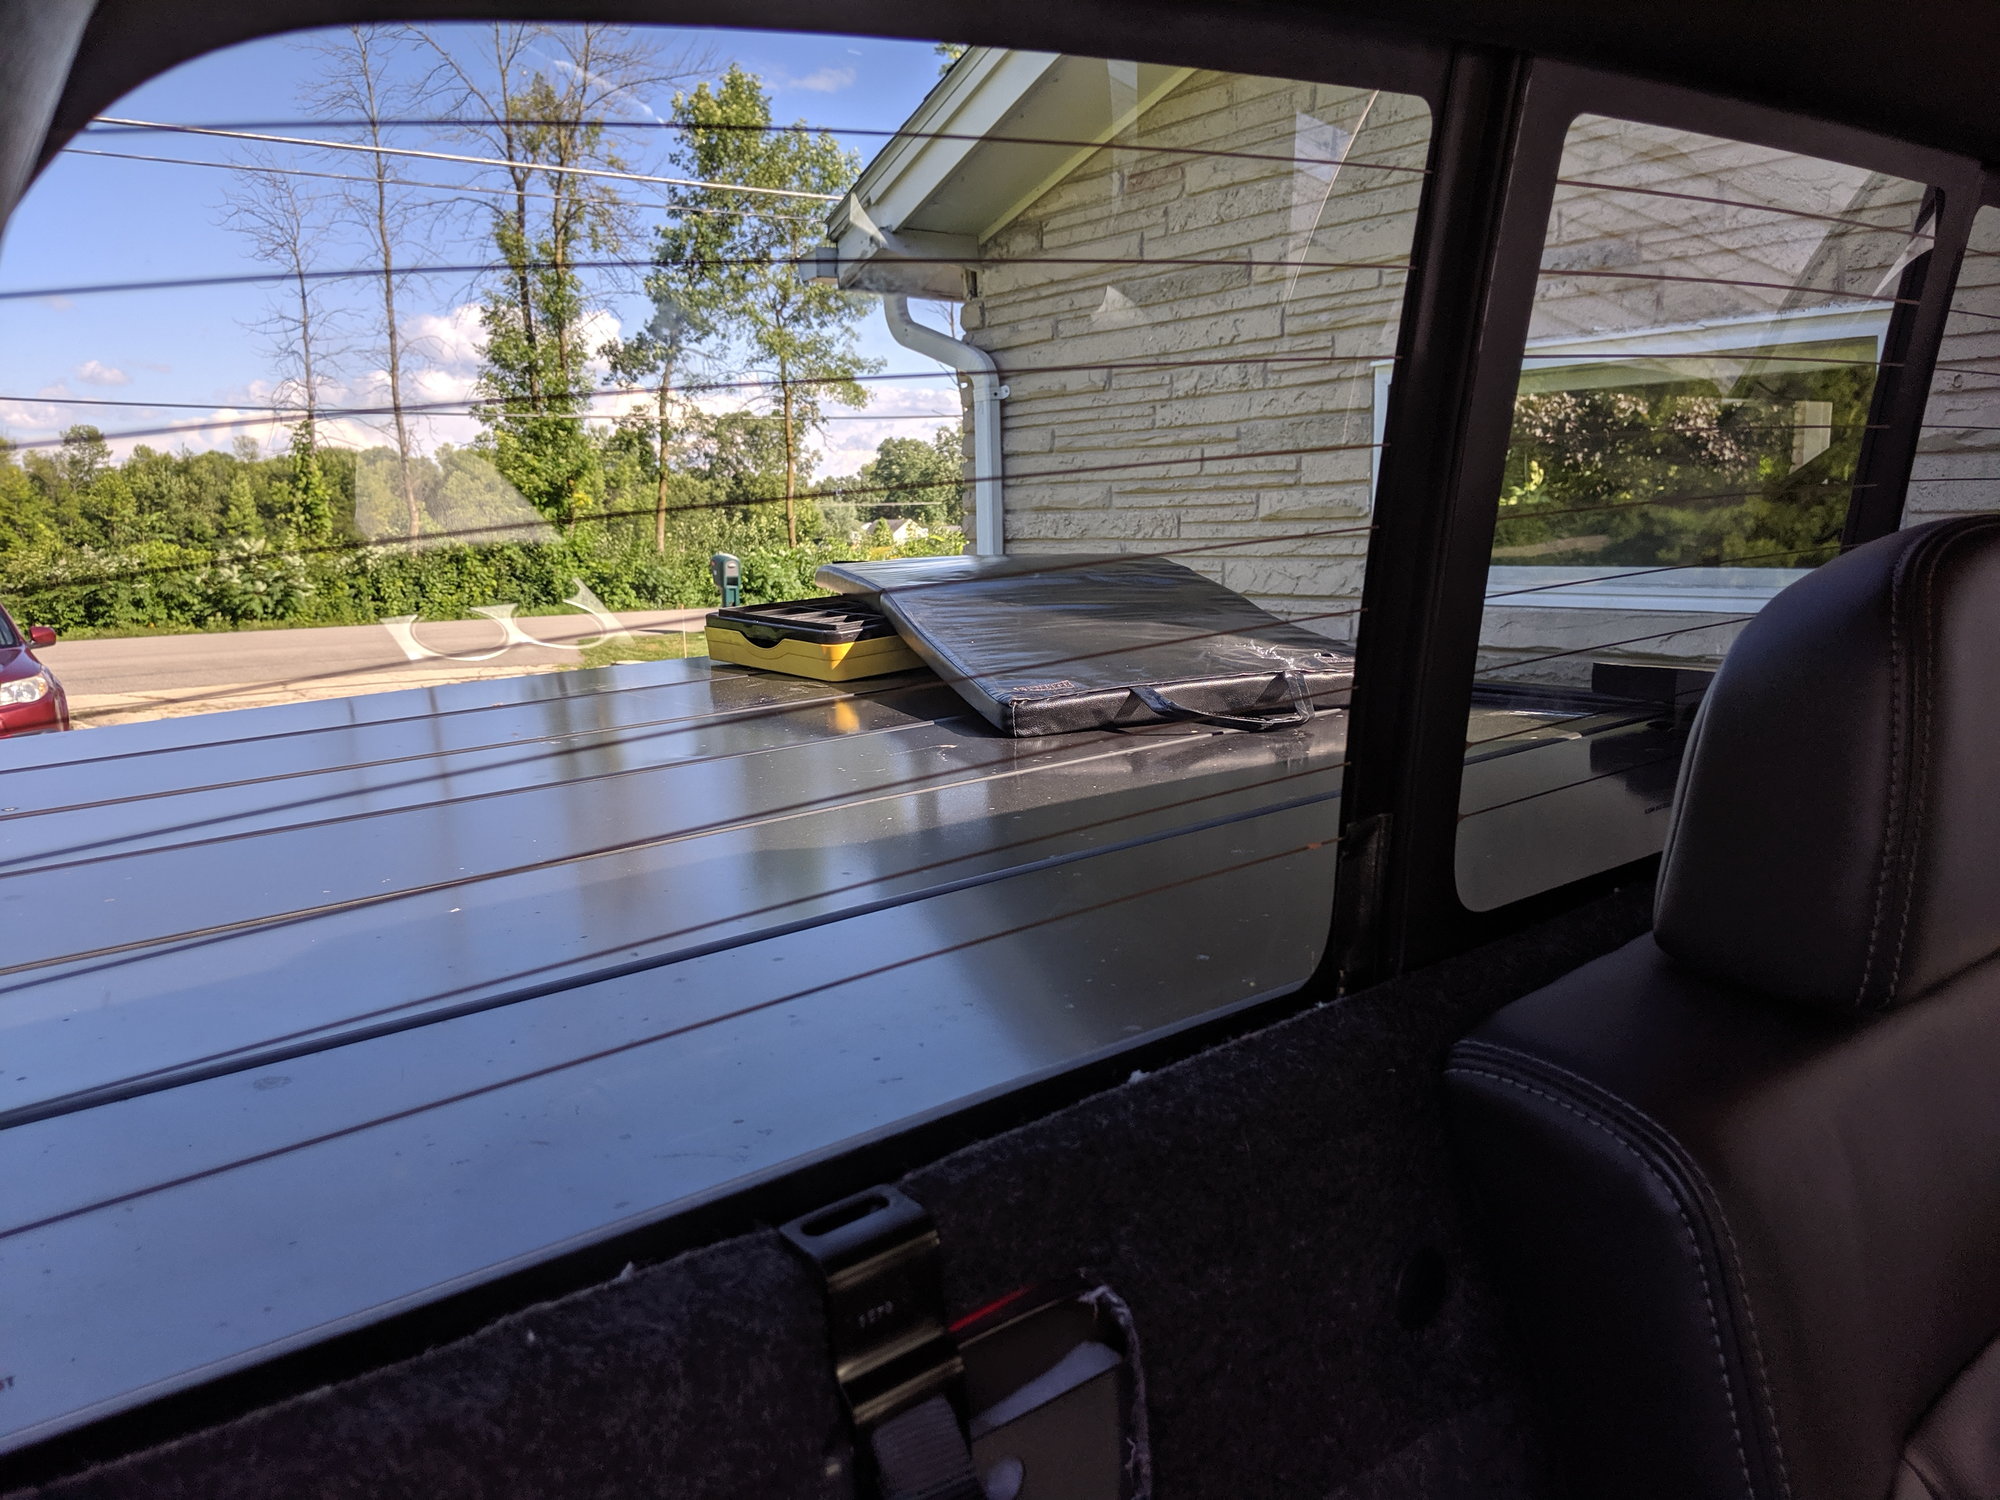 need help! I broke the driver side glass of my 3 piece power slider rear  window. 2022 tacoma. I've made 4 appointments with 3 different auto glass  companies and they all either